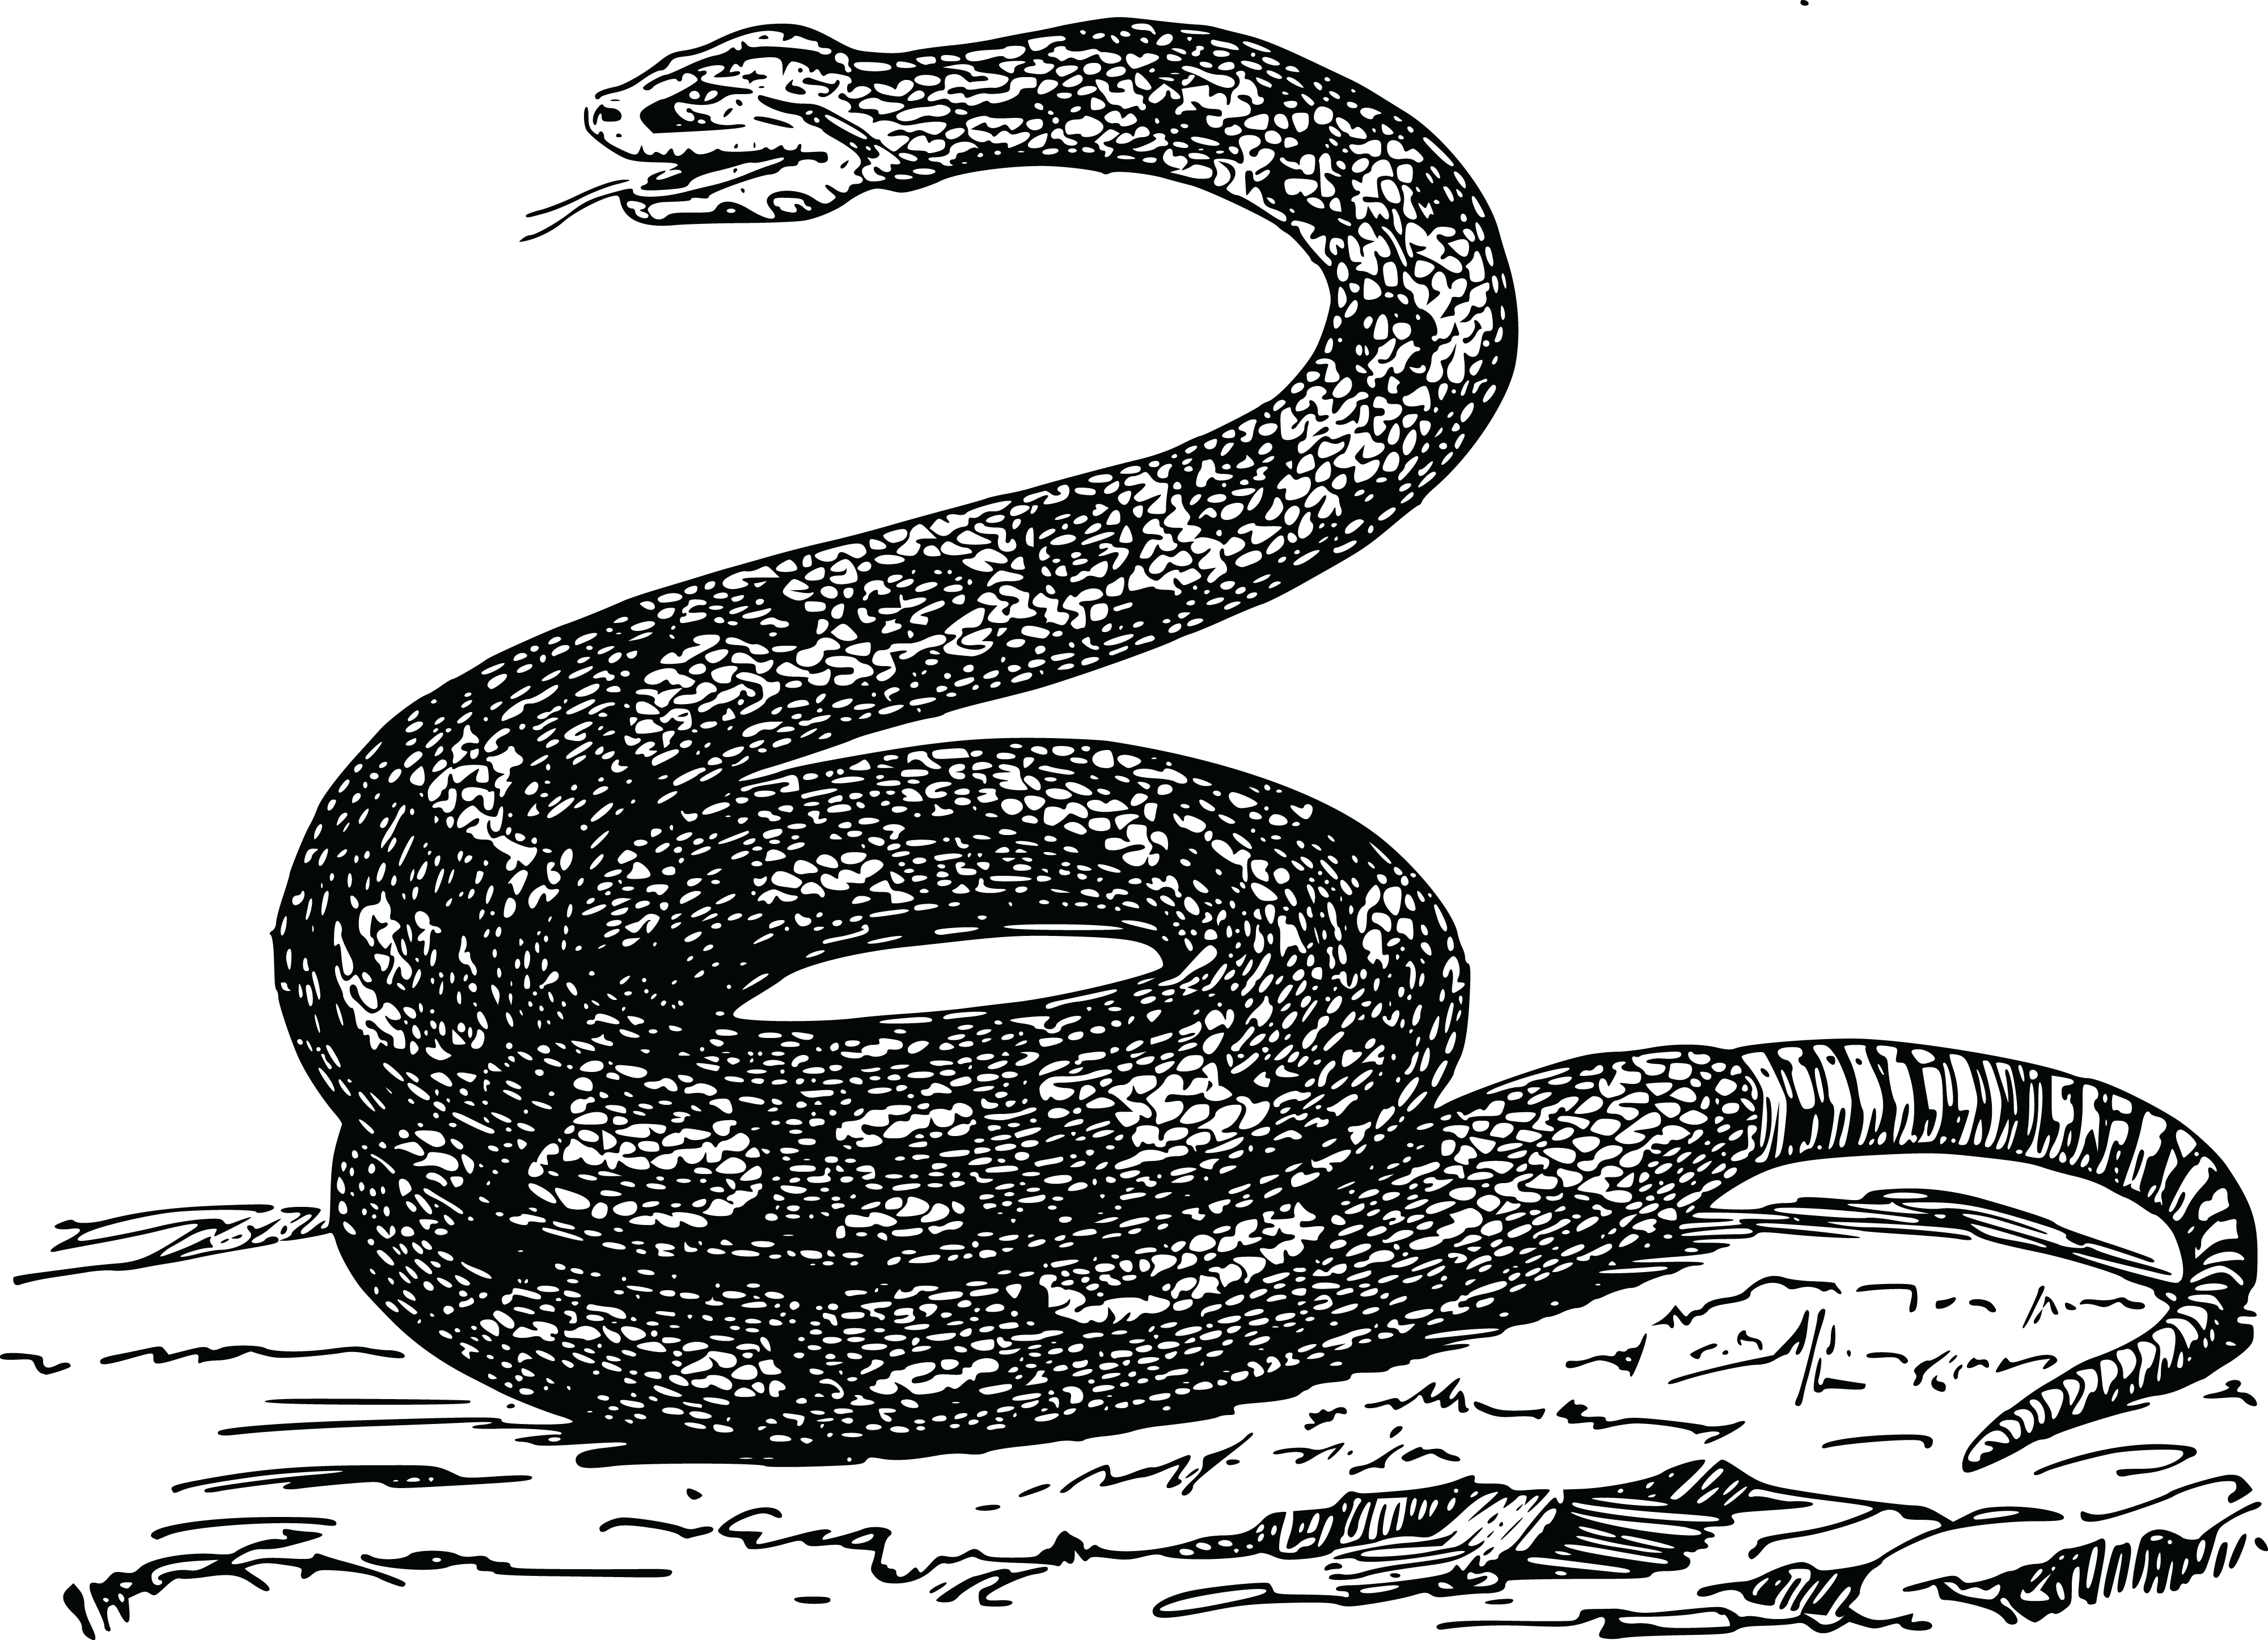 snake clipart simple